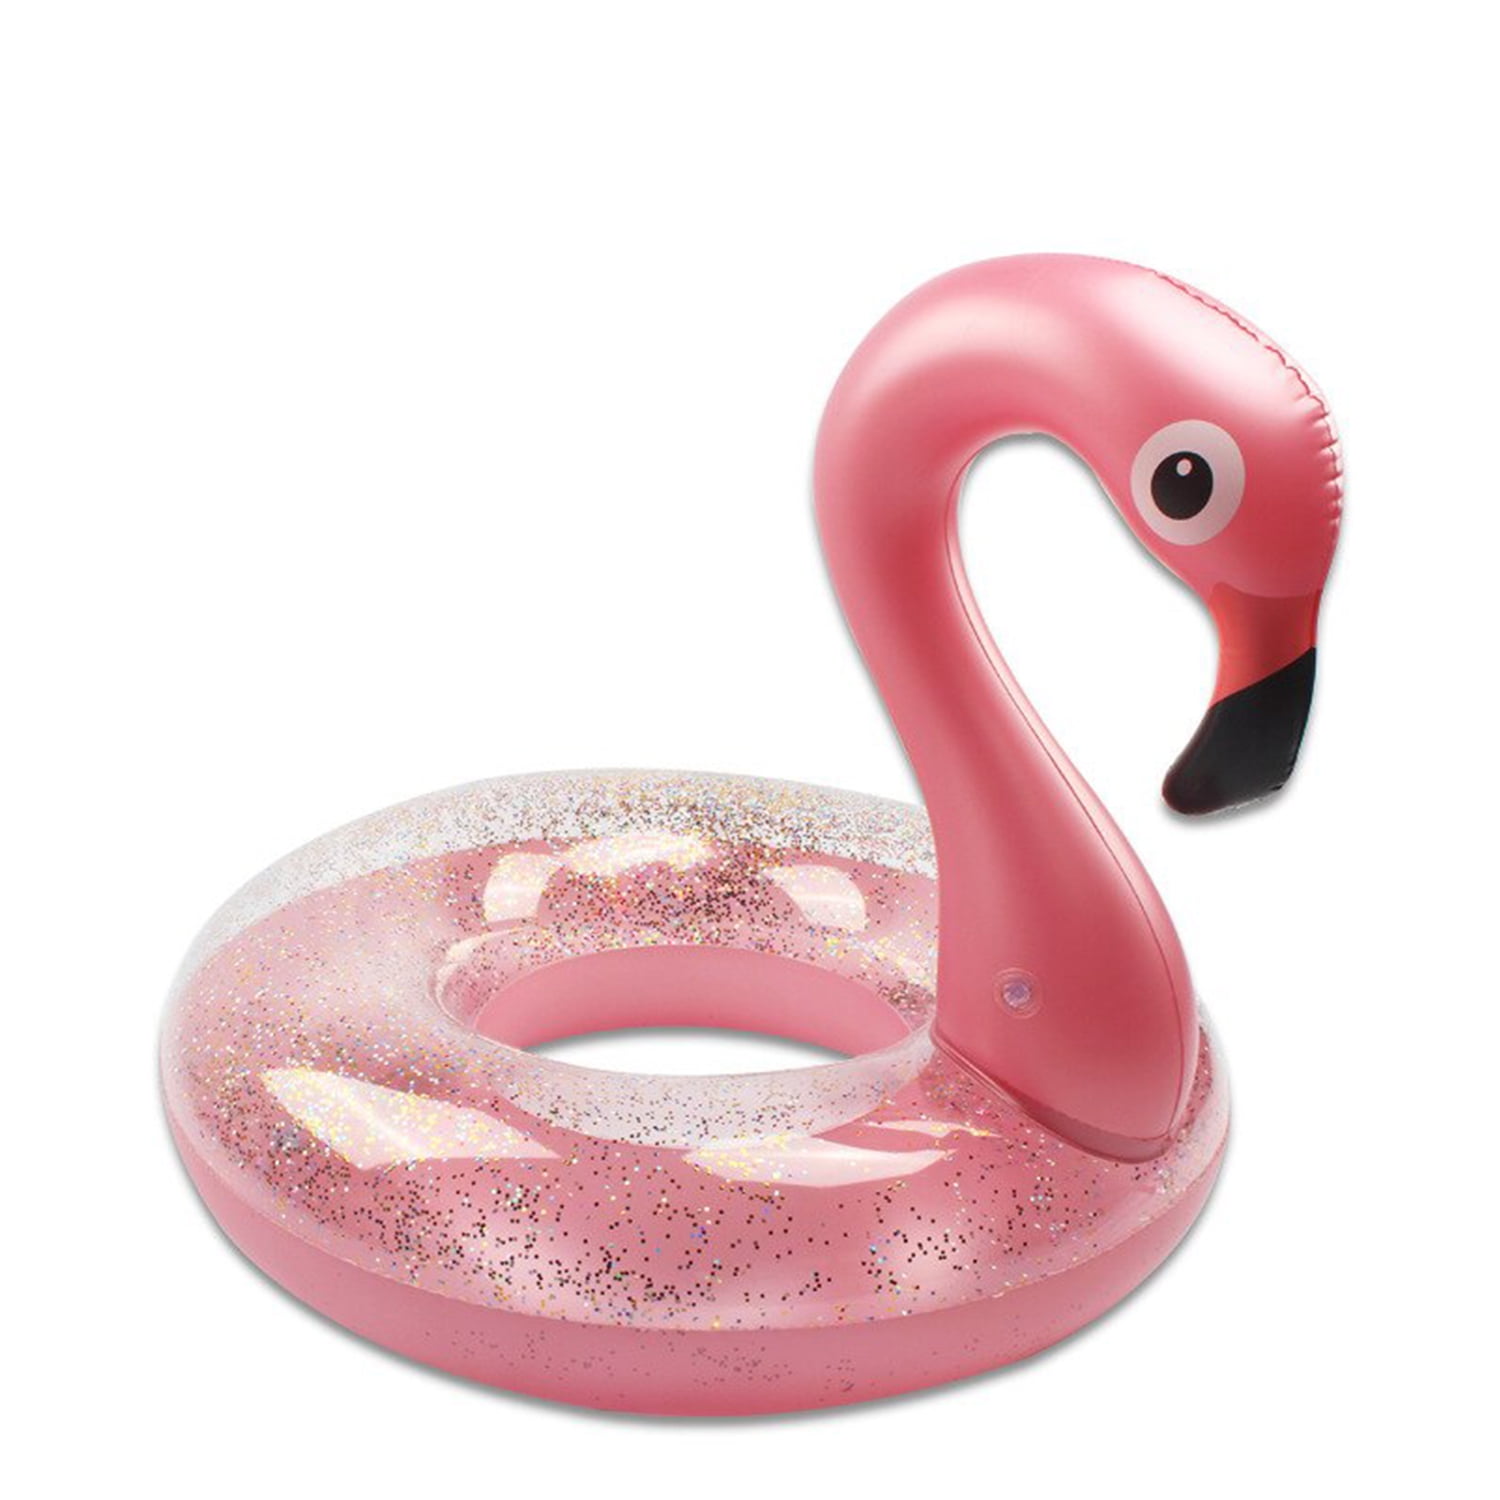 GIANT INFLATABLE FLAMINGO FUN WATER FLOAT RAFT RIDE ON POOL LOUNGER BEACH TOY 